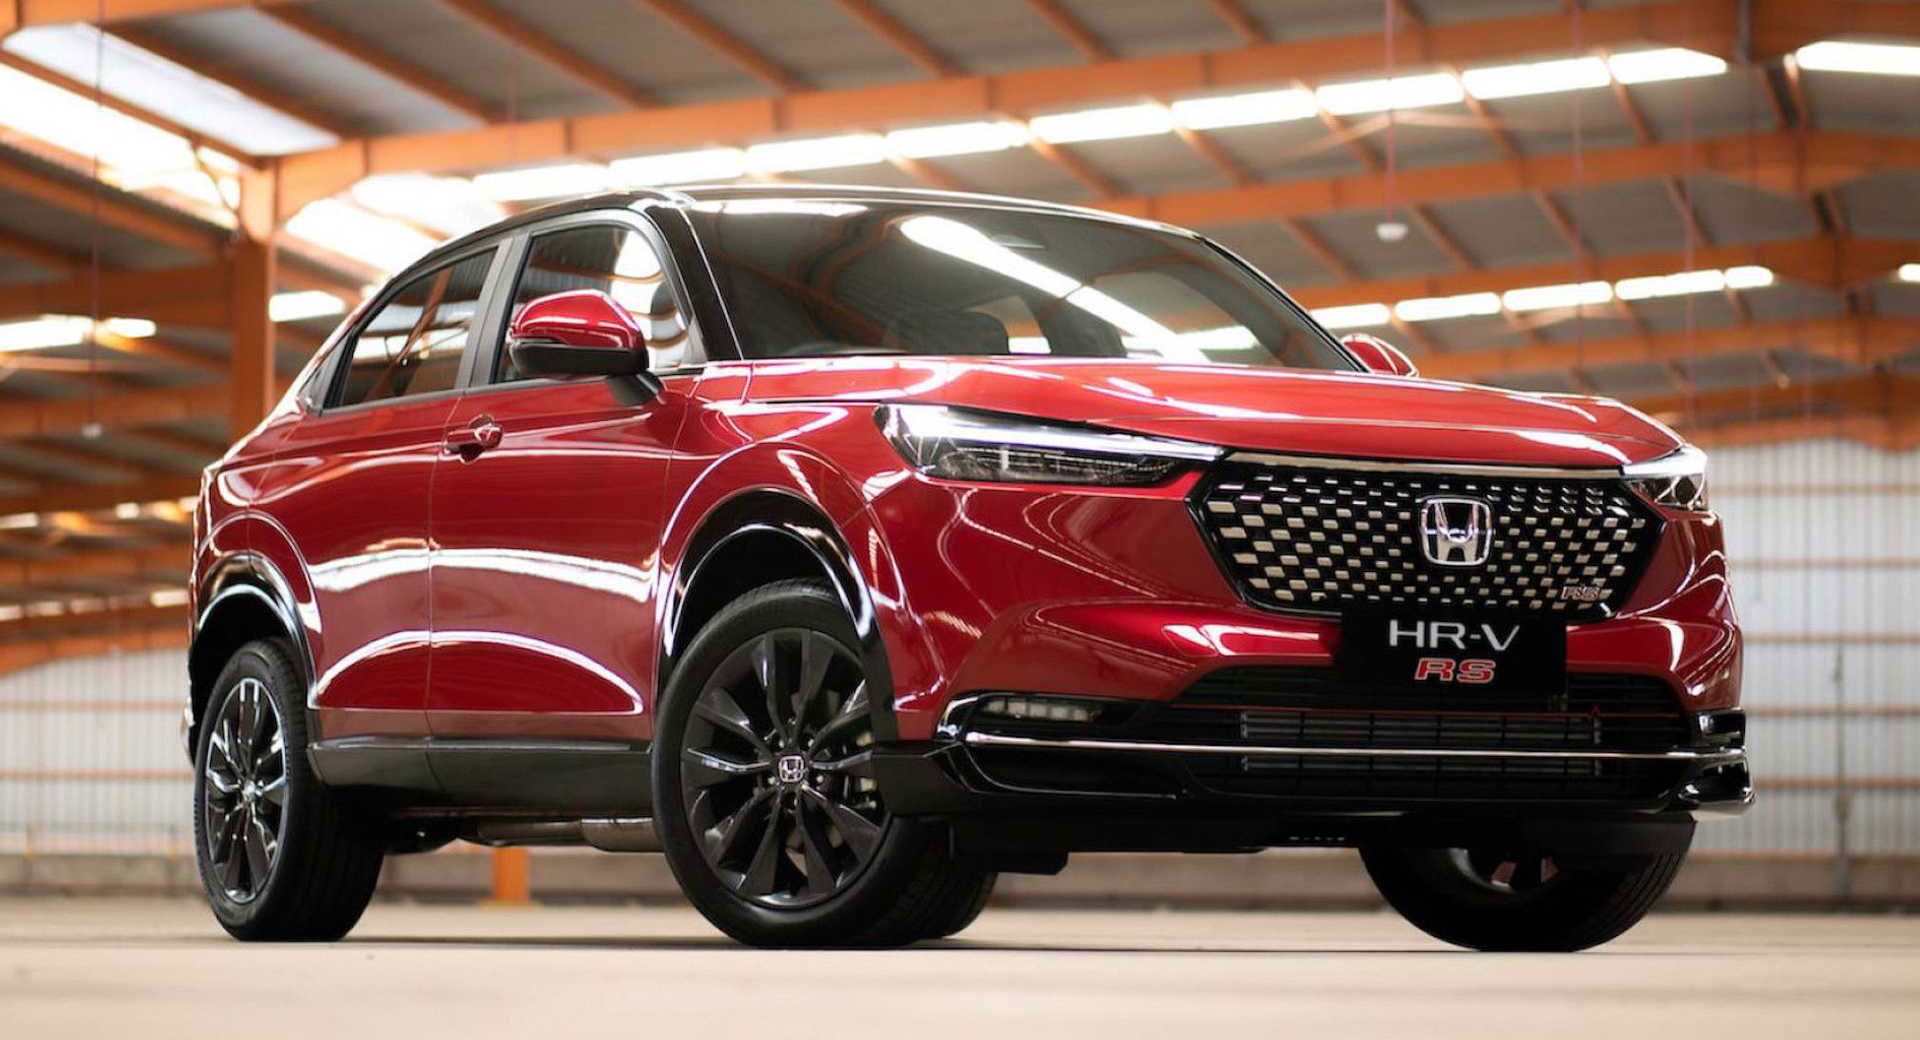 Honda HRV Booking Price & Delivery Status